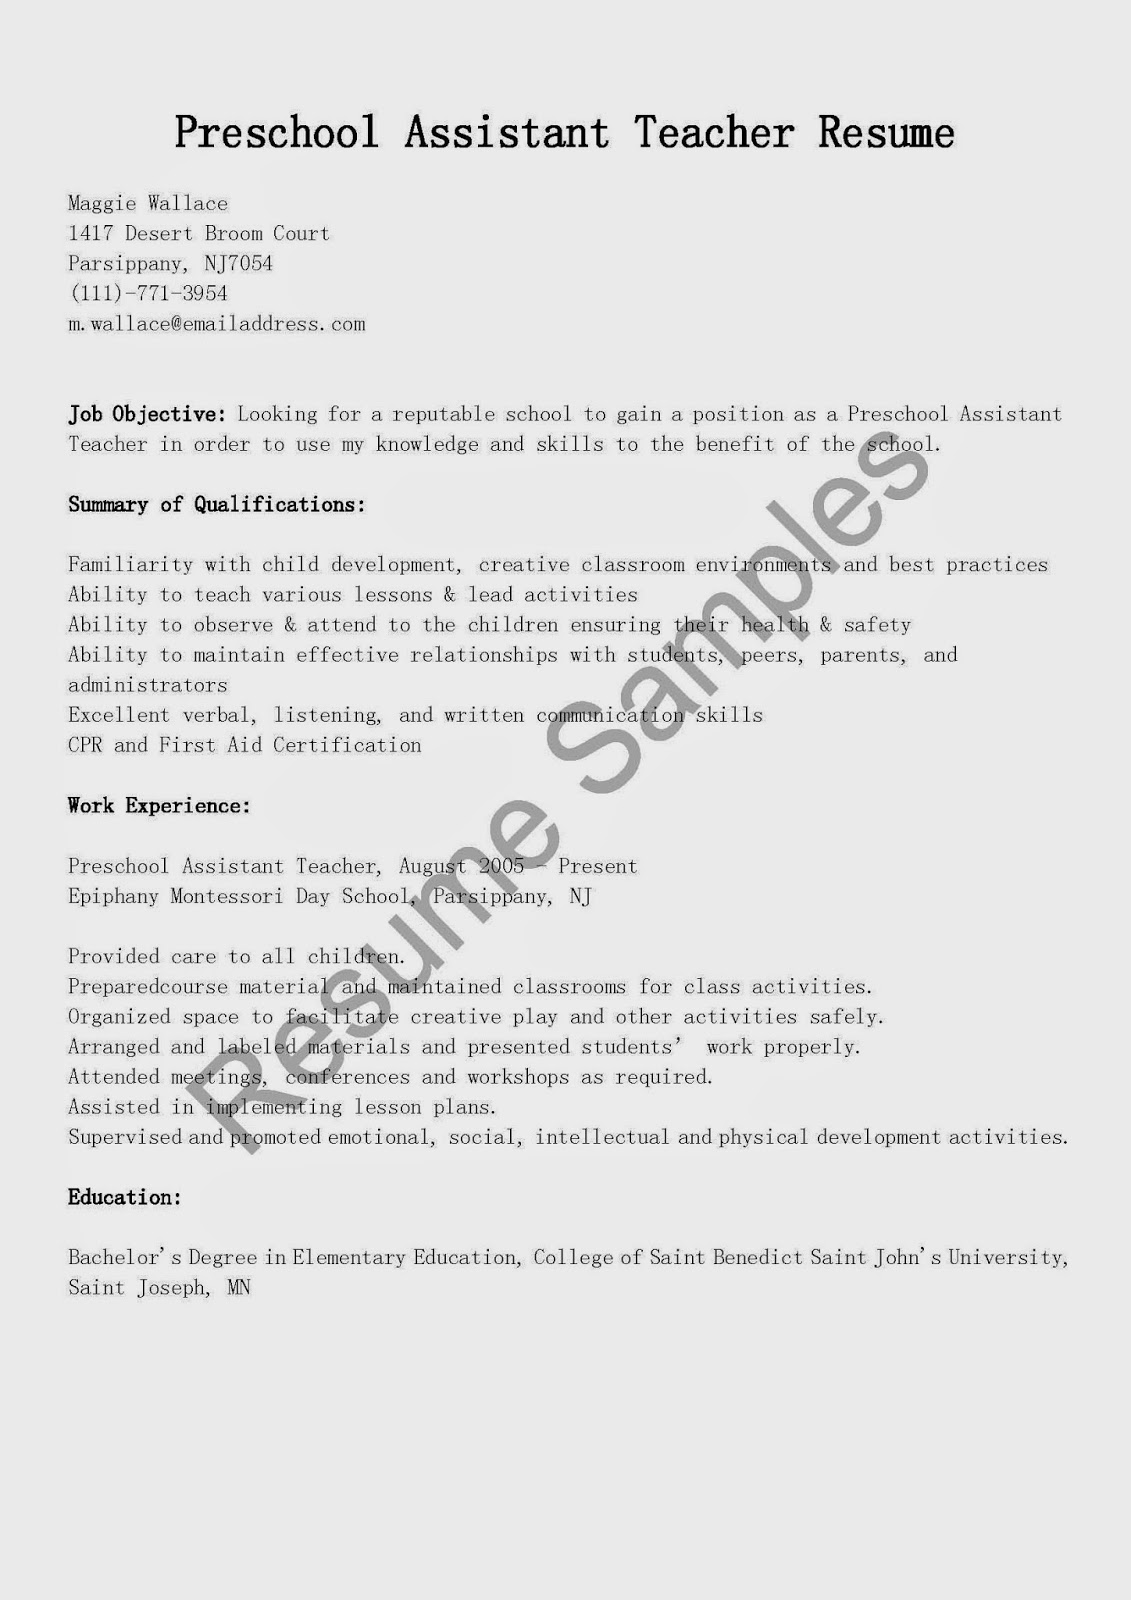 Care day resume worker